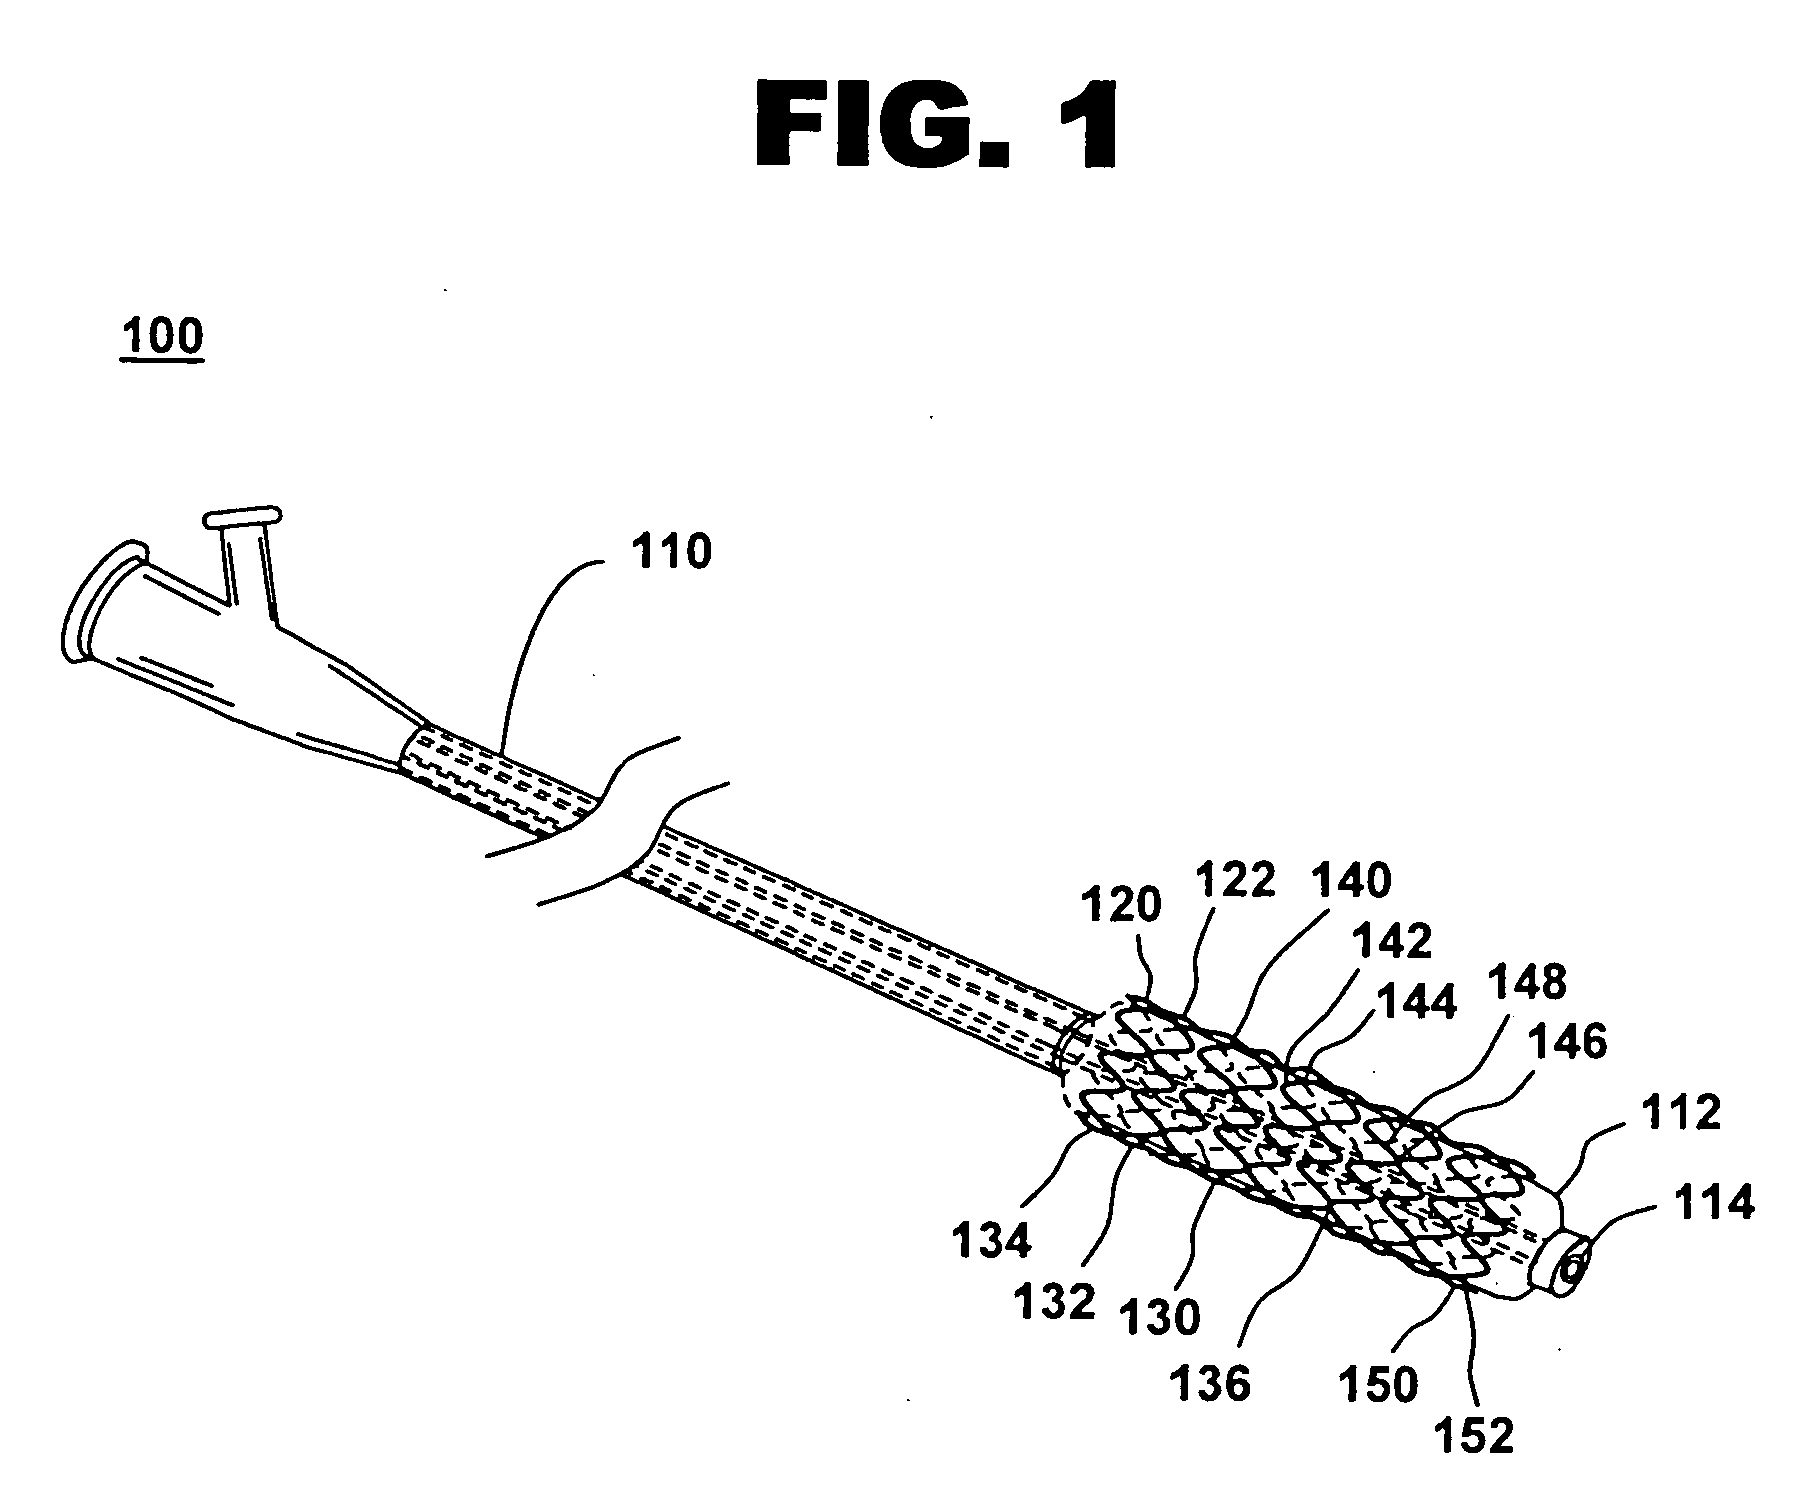 Coated stent having protruding crowns and elongated struts